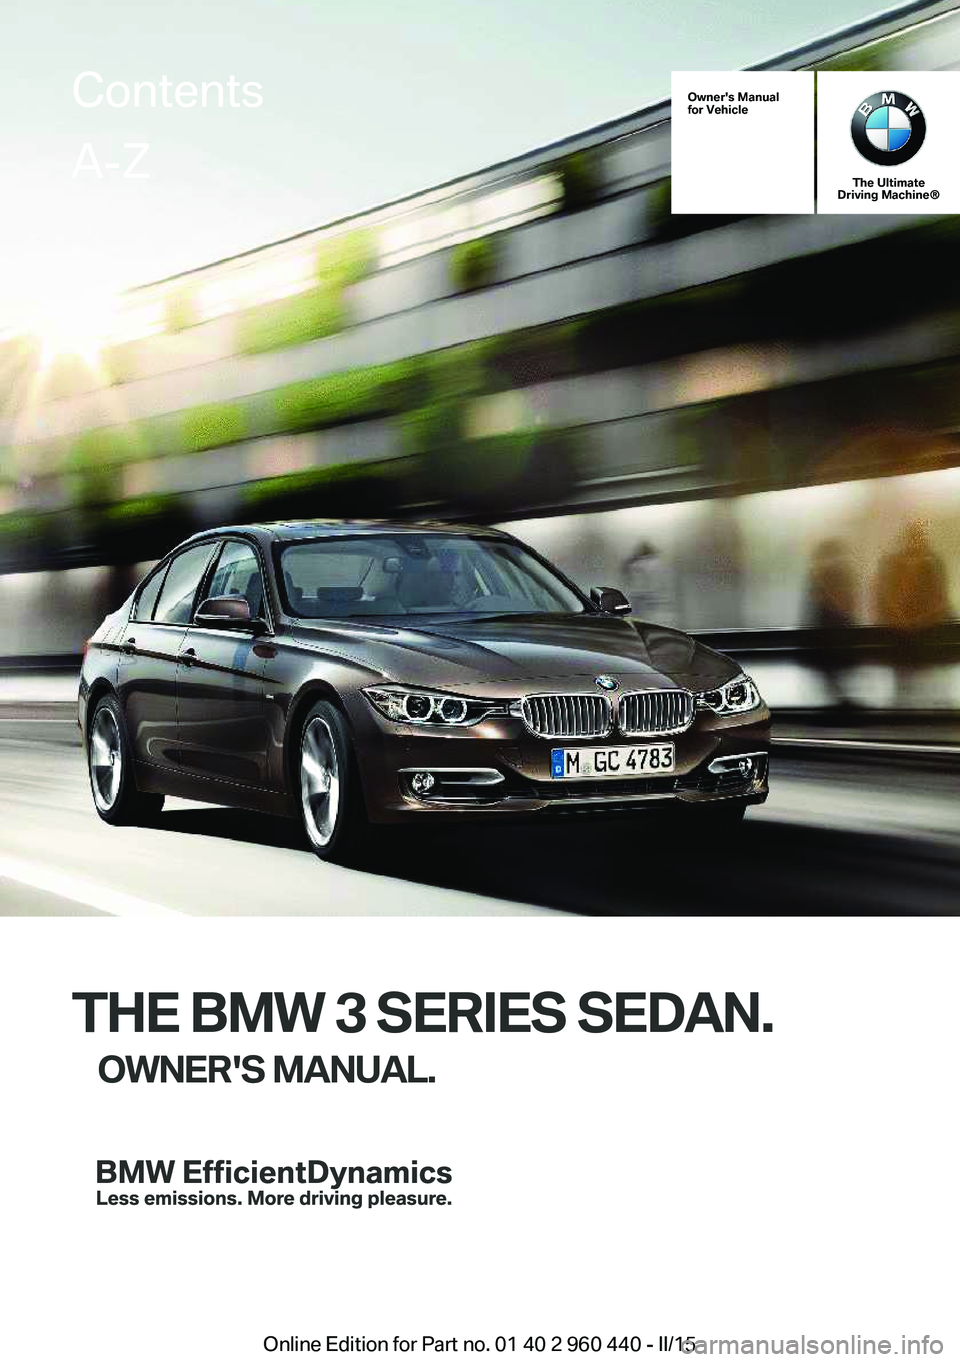 BMW 335I SEDAN 2015  Owners Manual Owner's Manual
for Vehicle
The Ultimate
Driving Machine®
THE BMW 3 SERIES SEDAN.
OWNER'S MANUAL.
ContentsA-Z
Online Edition for Part no. 01 40 2 960 440 - II/15   